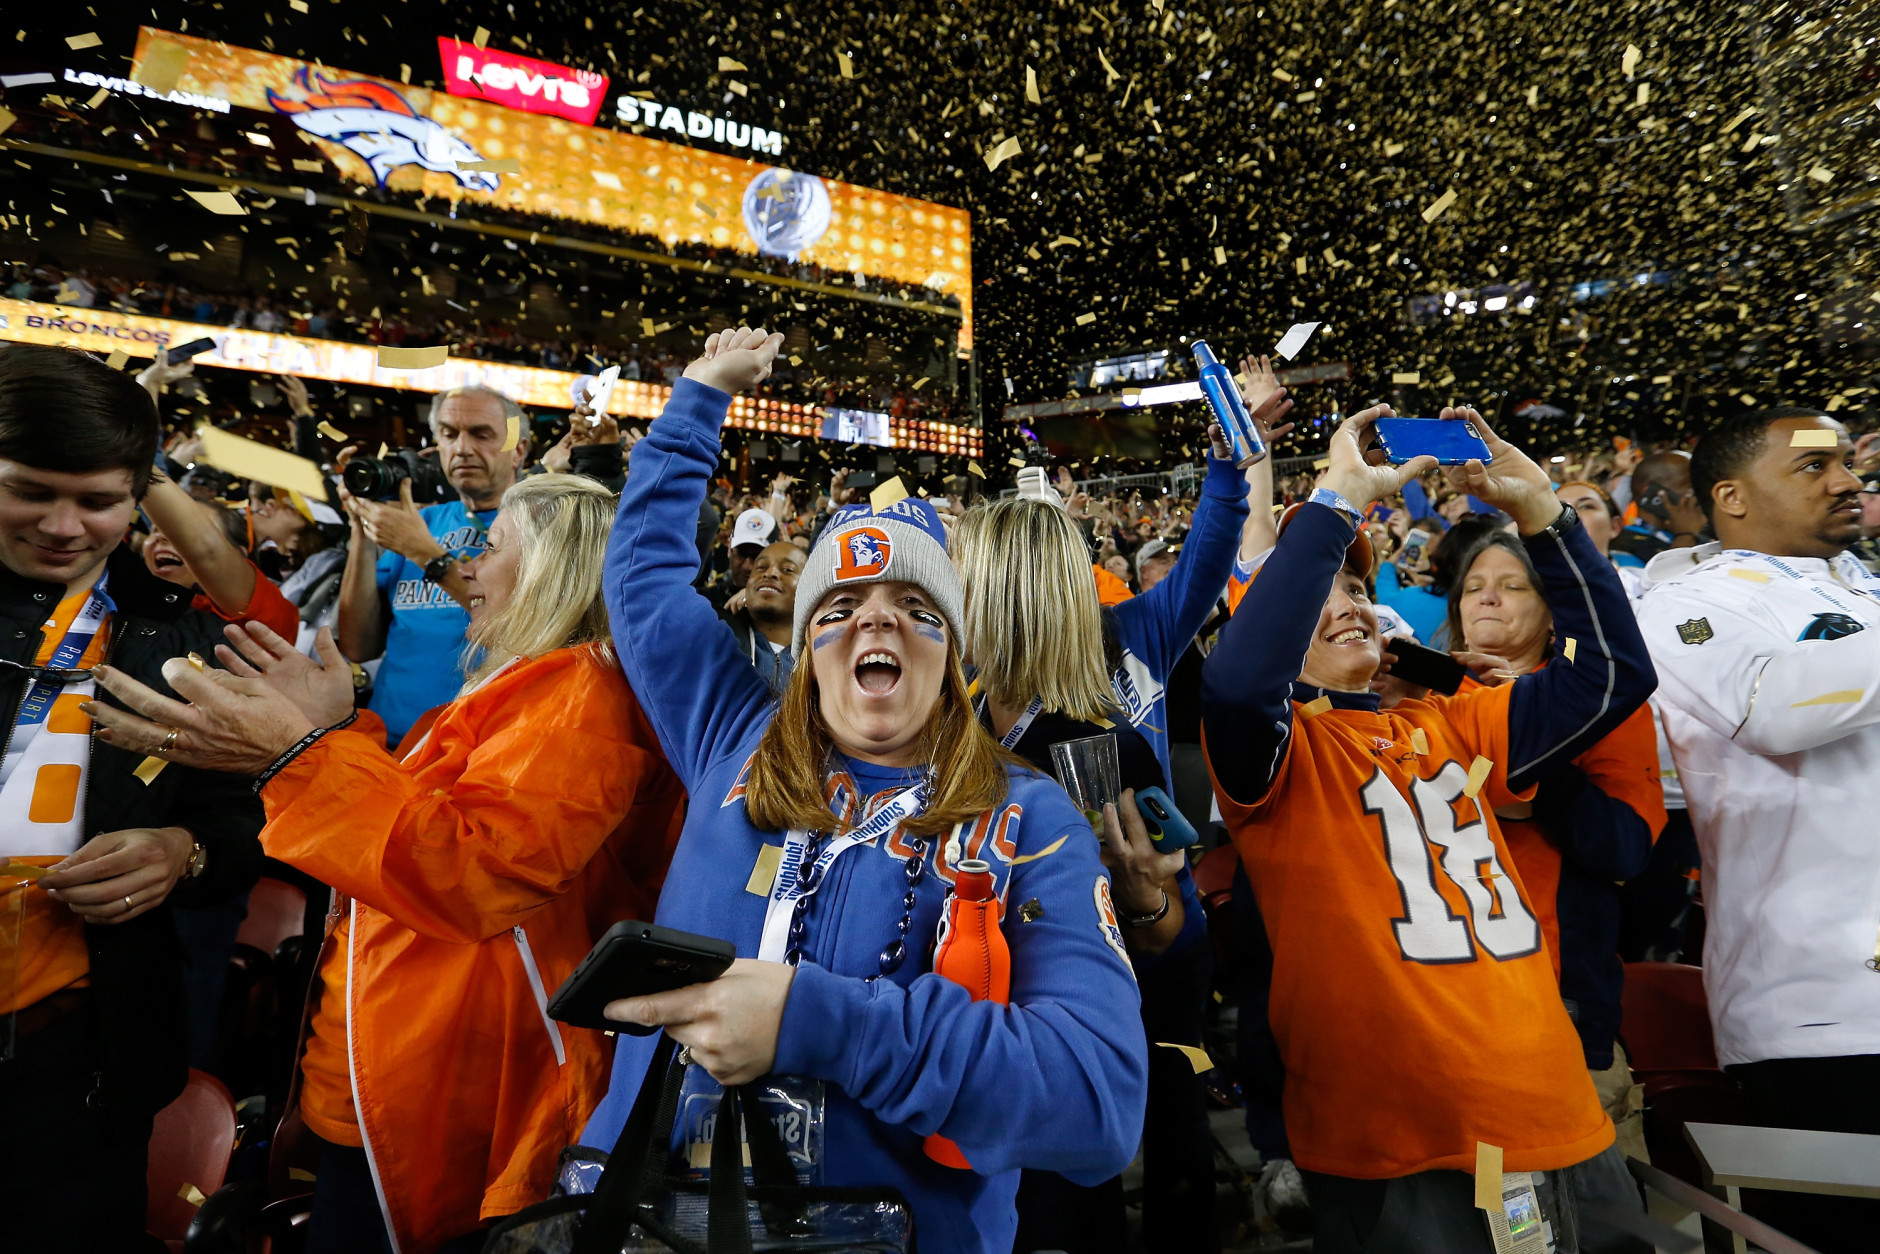 SANTA CLARA, CA - FEBRUARY 07:  Fans of the Denver Broncos celebrate in the stands following Super Bowl 50 at Levi's Stadium on February 7, 2016 in Santa Clara, California. The Carolina Panthers were defeated by the Denver Broncos 24-10. (Photo by Sean M. Haffey/Getty Images)